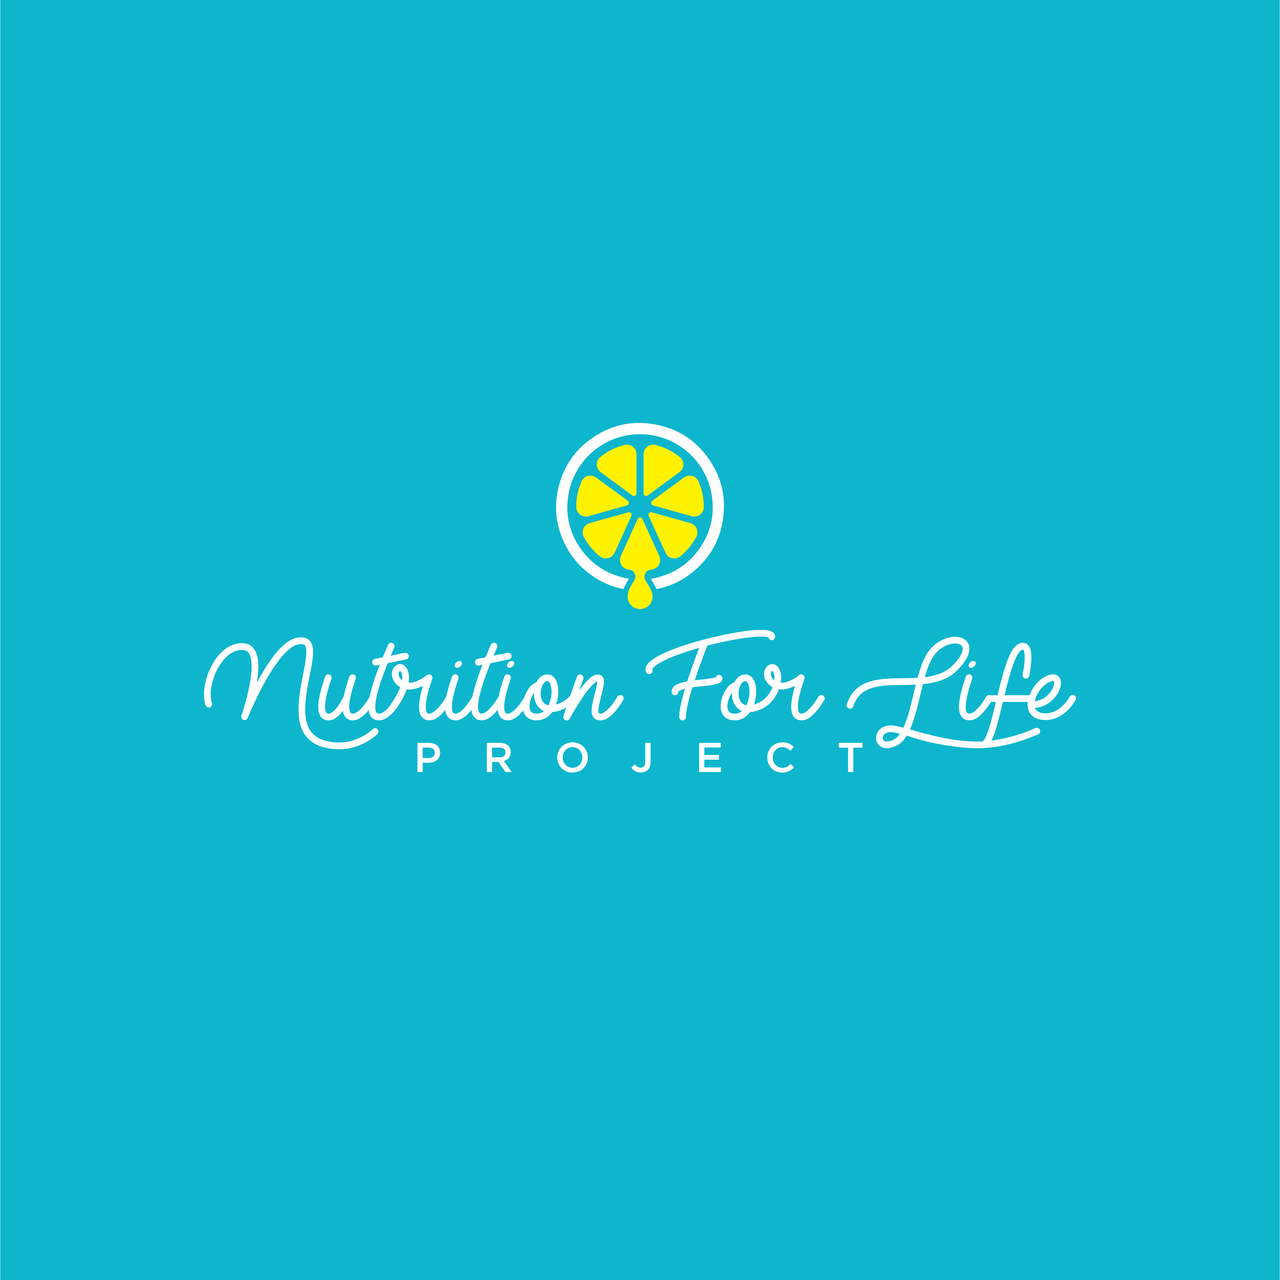 Artwork for The Nutrition For Life Project Blog